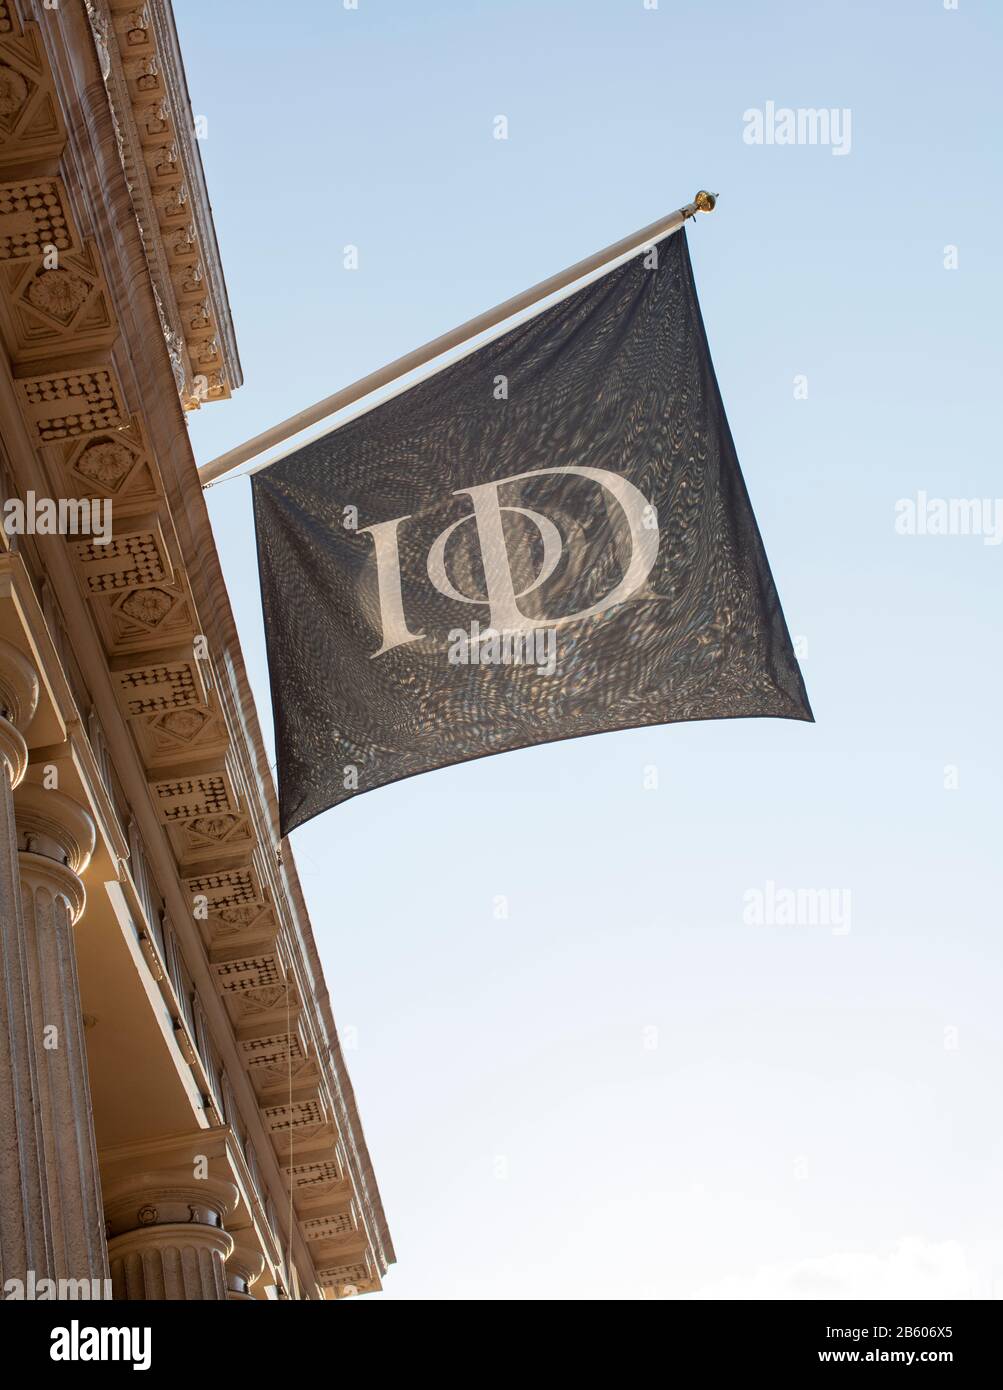 Flag of the Institute of Directors, 116 Pall Mall, London; a business organisation for company directors, business leaders, etc. Stock Photo